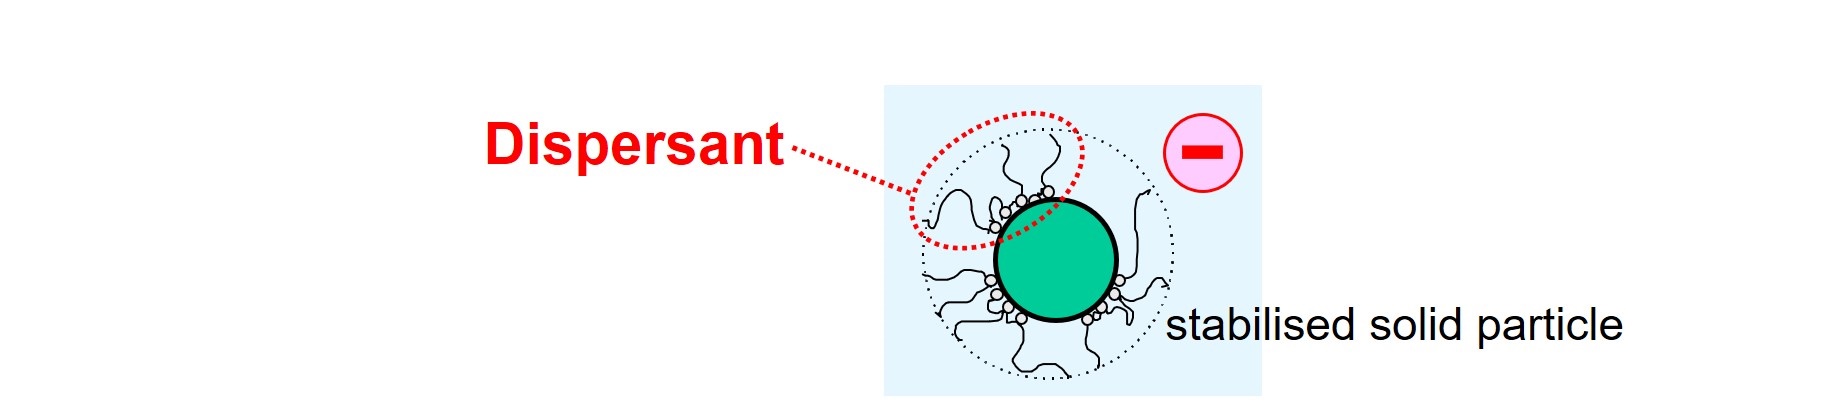 Dispersant molecules adsorbed at the interface of a solid particle and liquid.